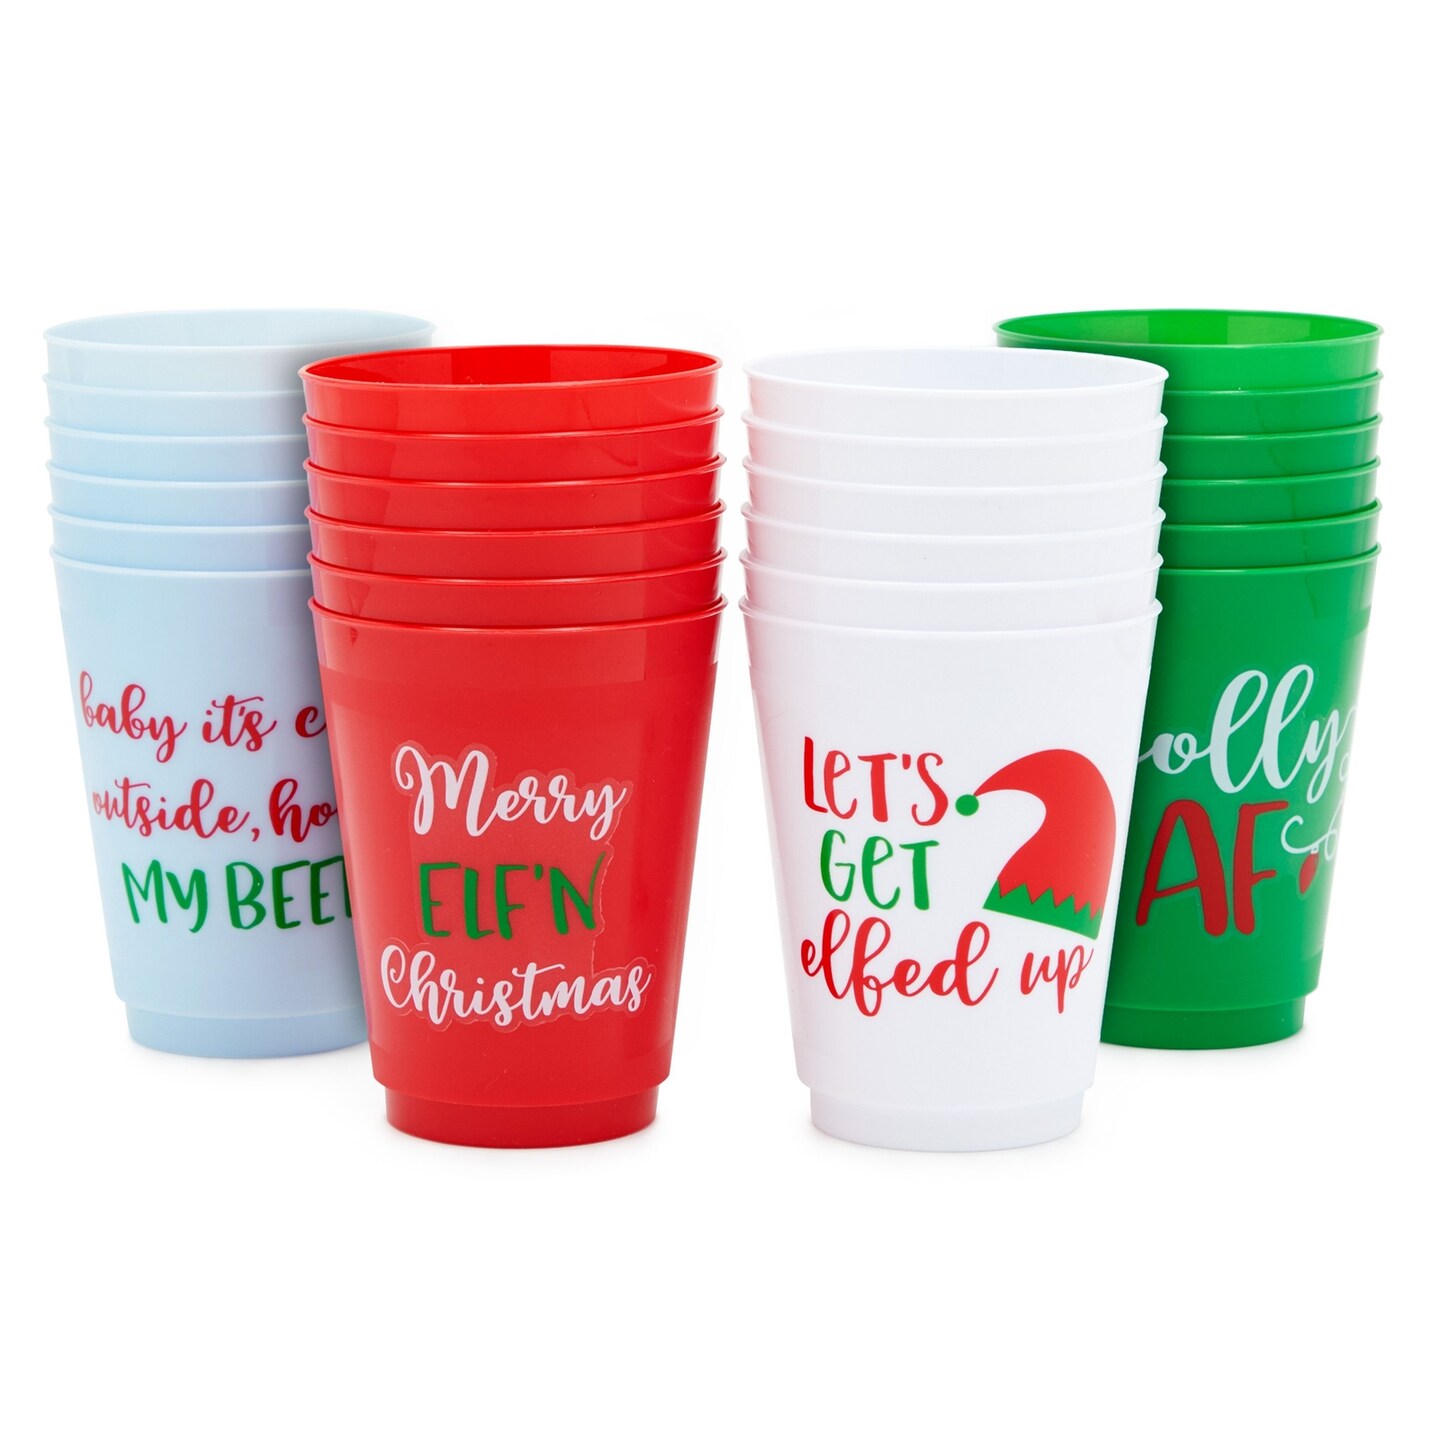 Happy Holidays Frosted Plastic Cups, Christmas Holiday Cups, Holiday Party Plastic  Cup for Beer, Christmas Party Favors, Christmas Cup 125 